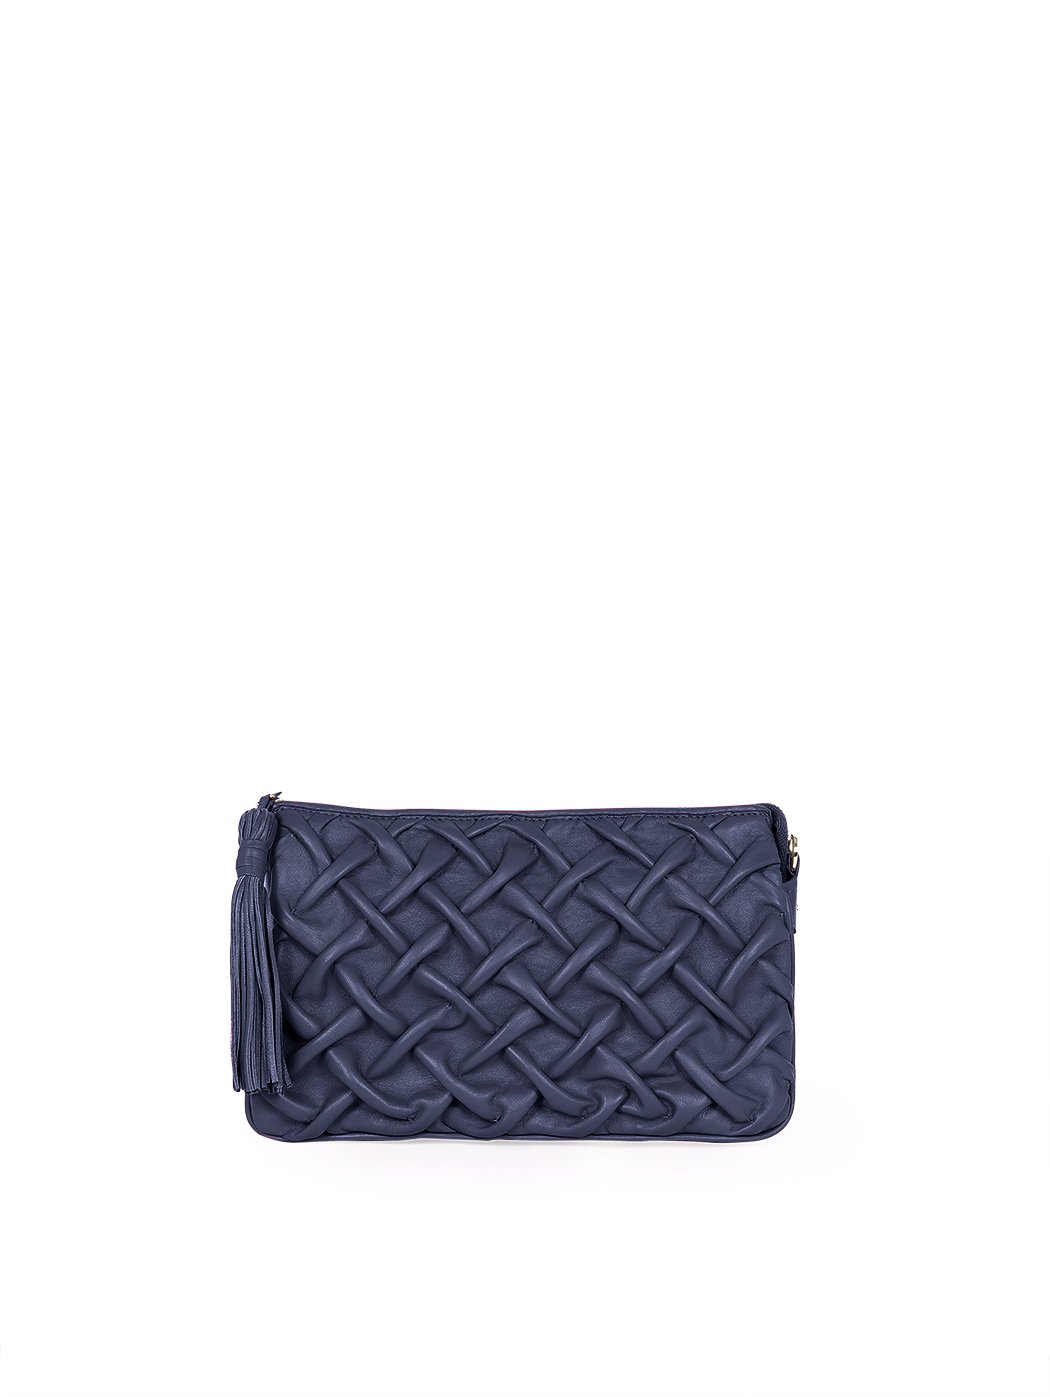 Quilted Weave Leather Accordion Crossbody Bag Blue